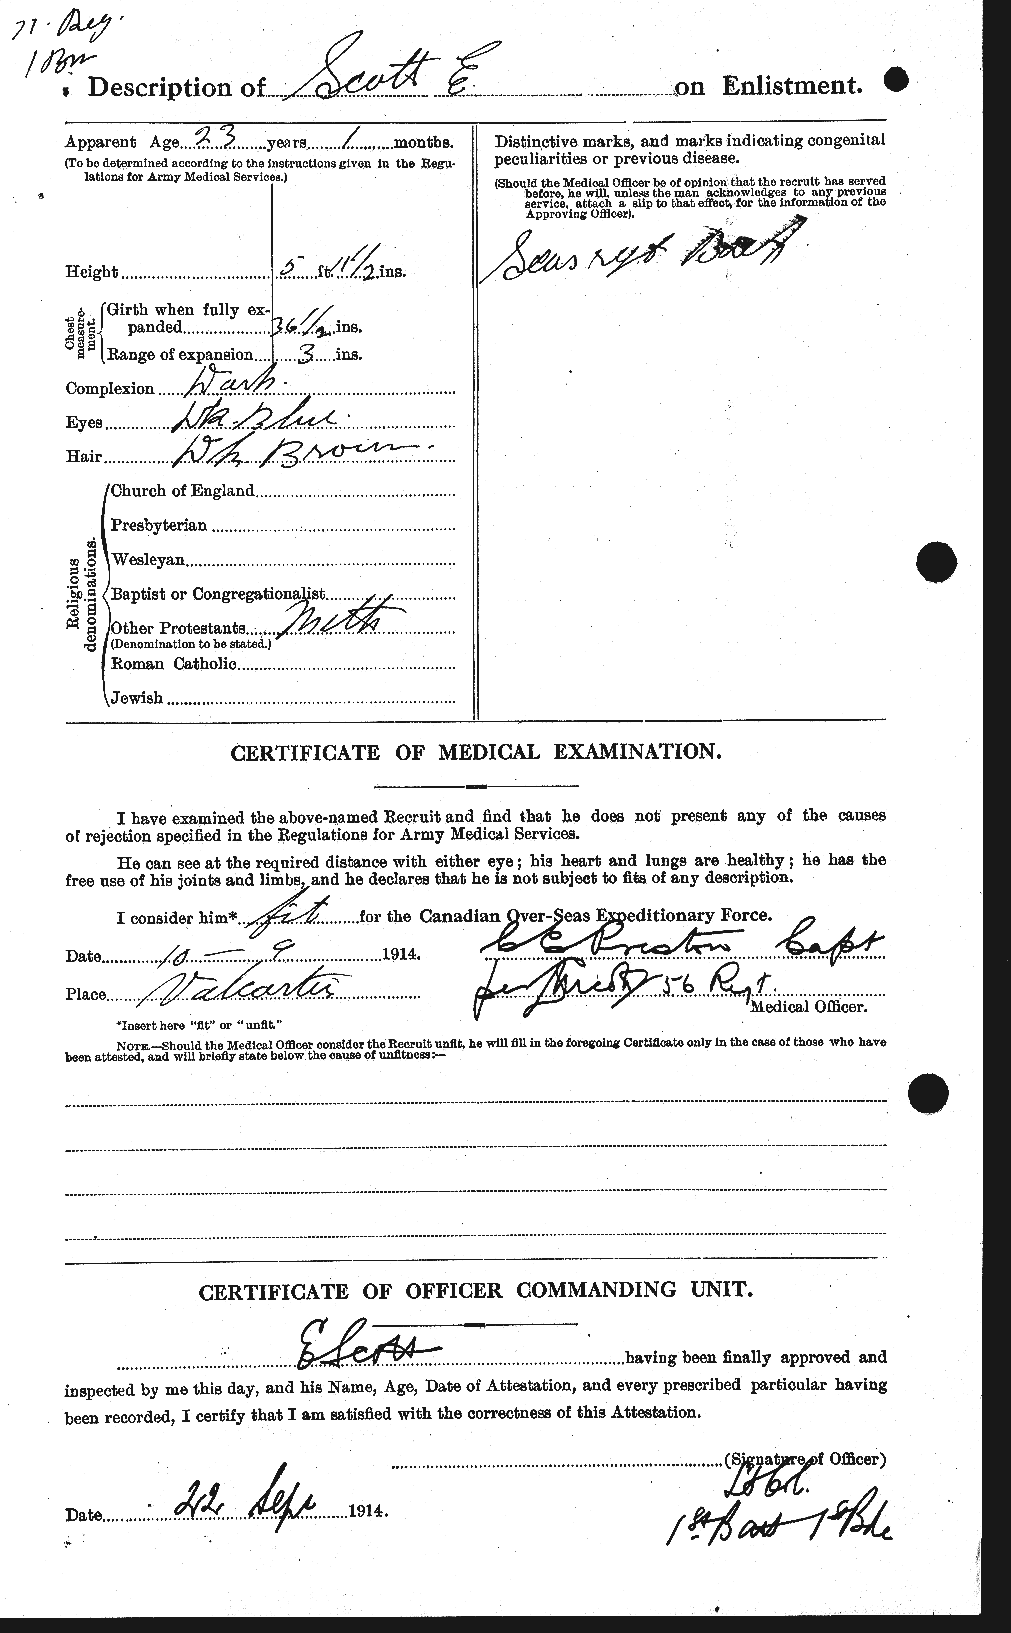 Personnel Records of the First World War - CEF 085342b